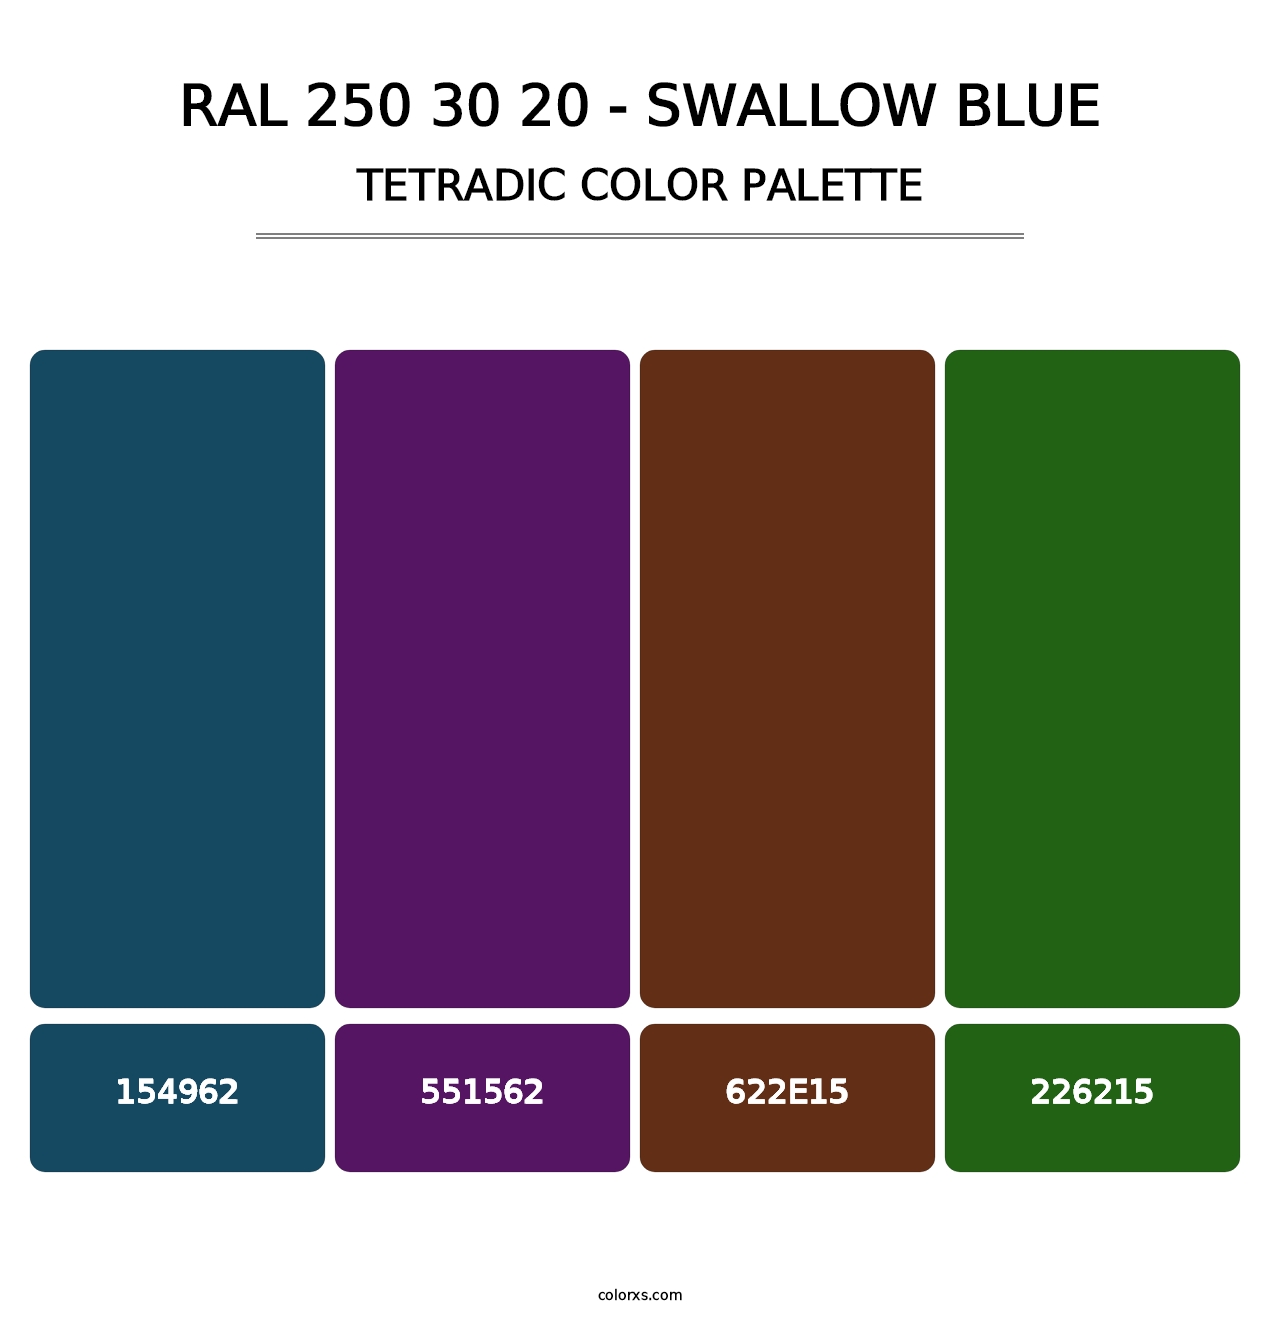 RAL 250 30 20 - Swallow Blue - Tetradic Color Palette